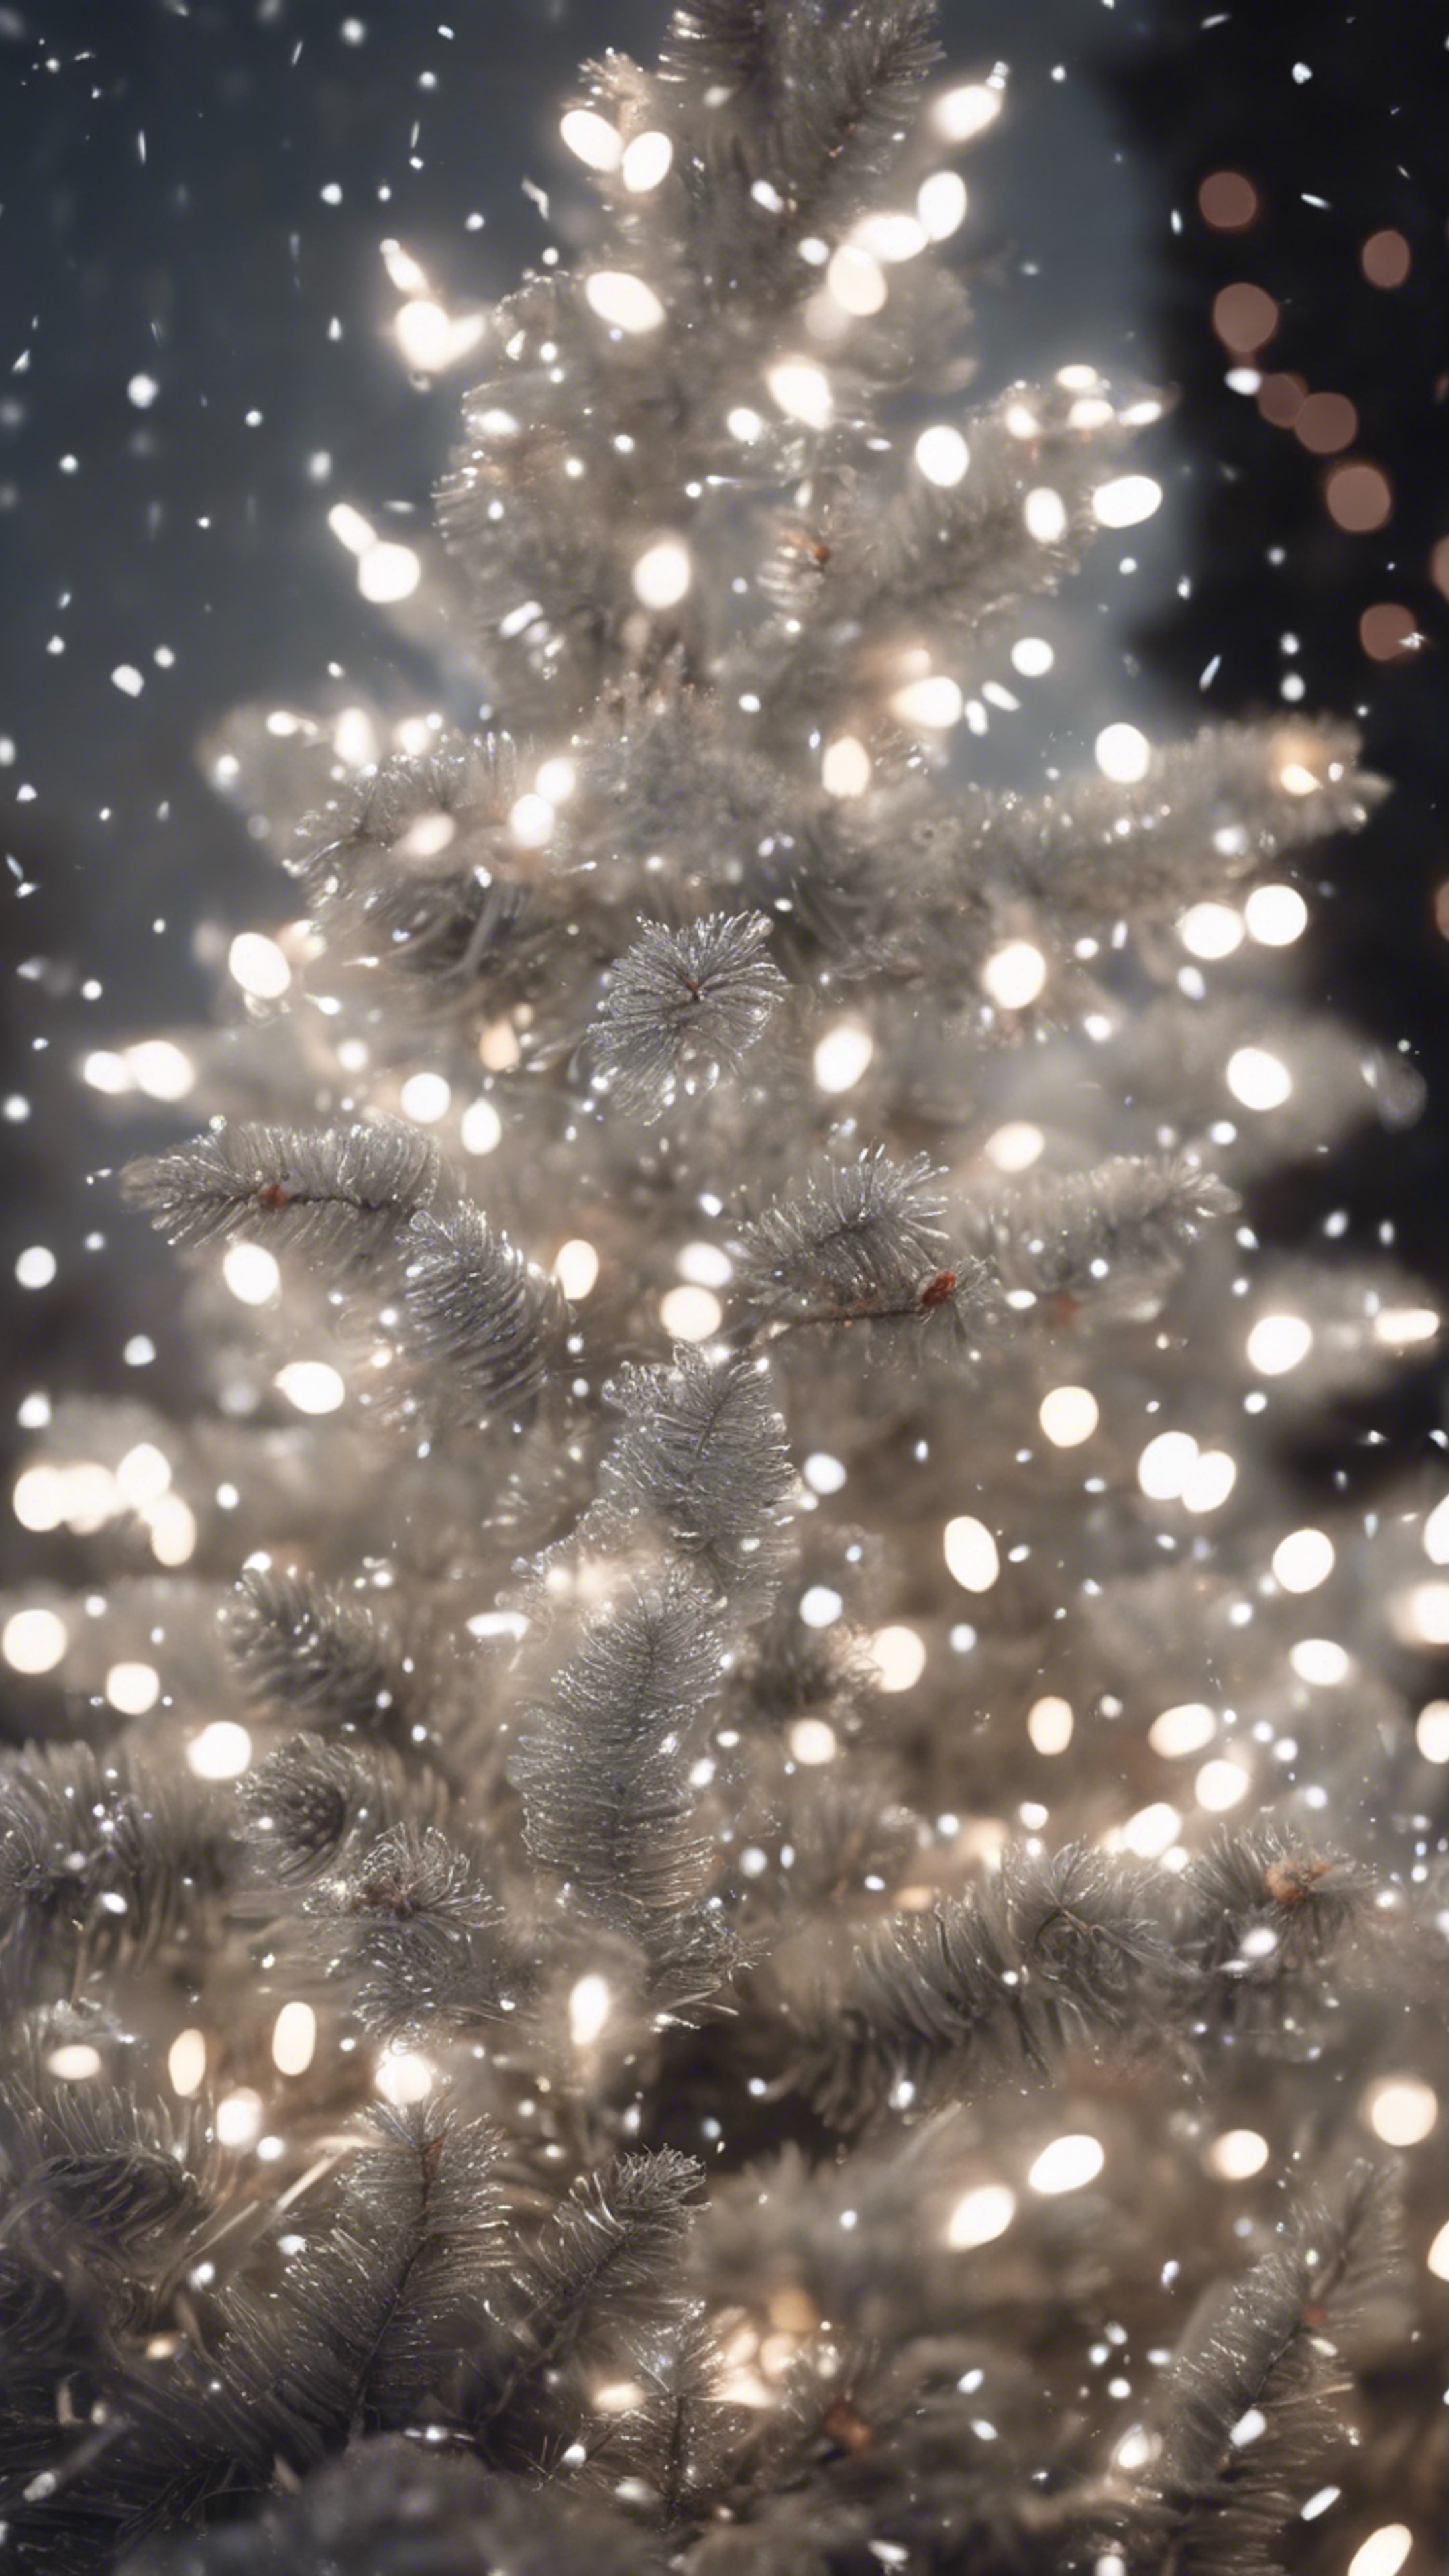 White Christmas lights shimmering on a silver spruce tree, with delicate snowflakes falling around.壁紙[aebc3baa8421448a9f7c]